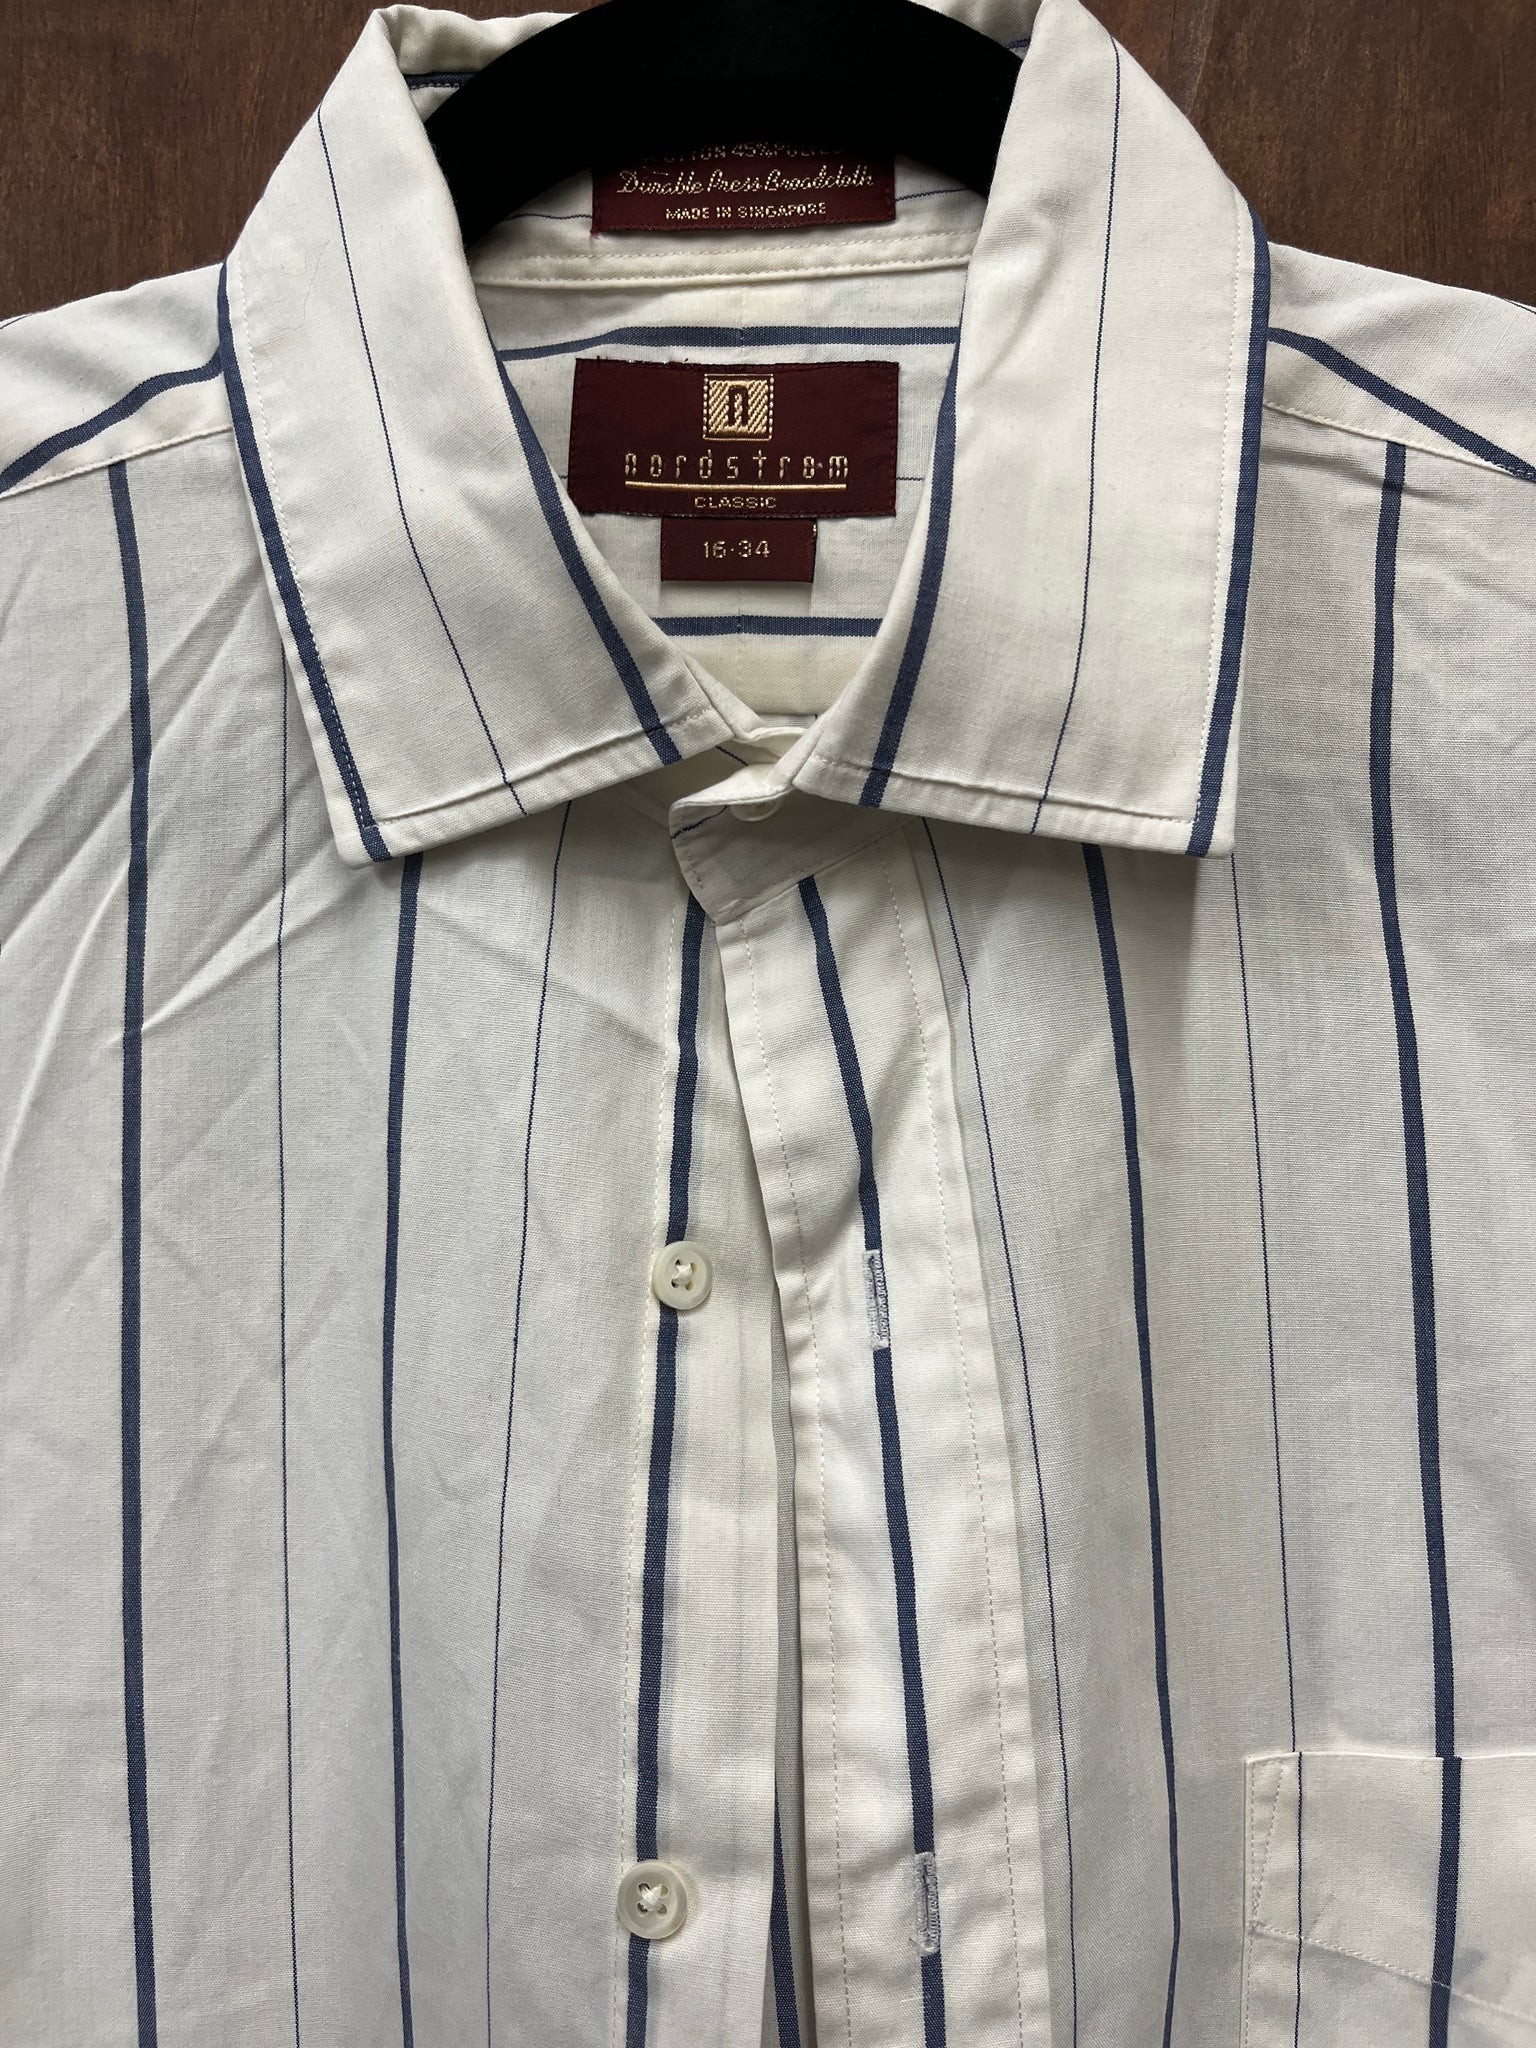 1990s MENS TOP- Nordstrom Classic- blue white stripped l/s button up